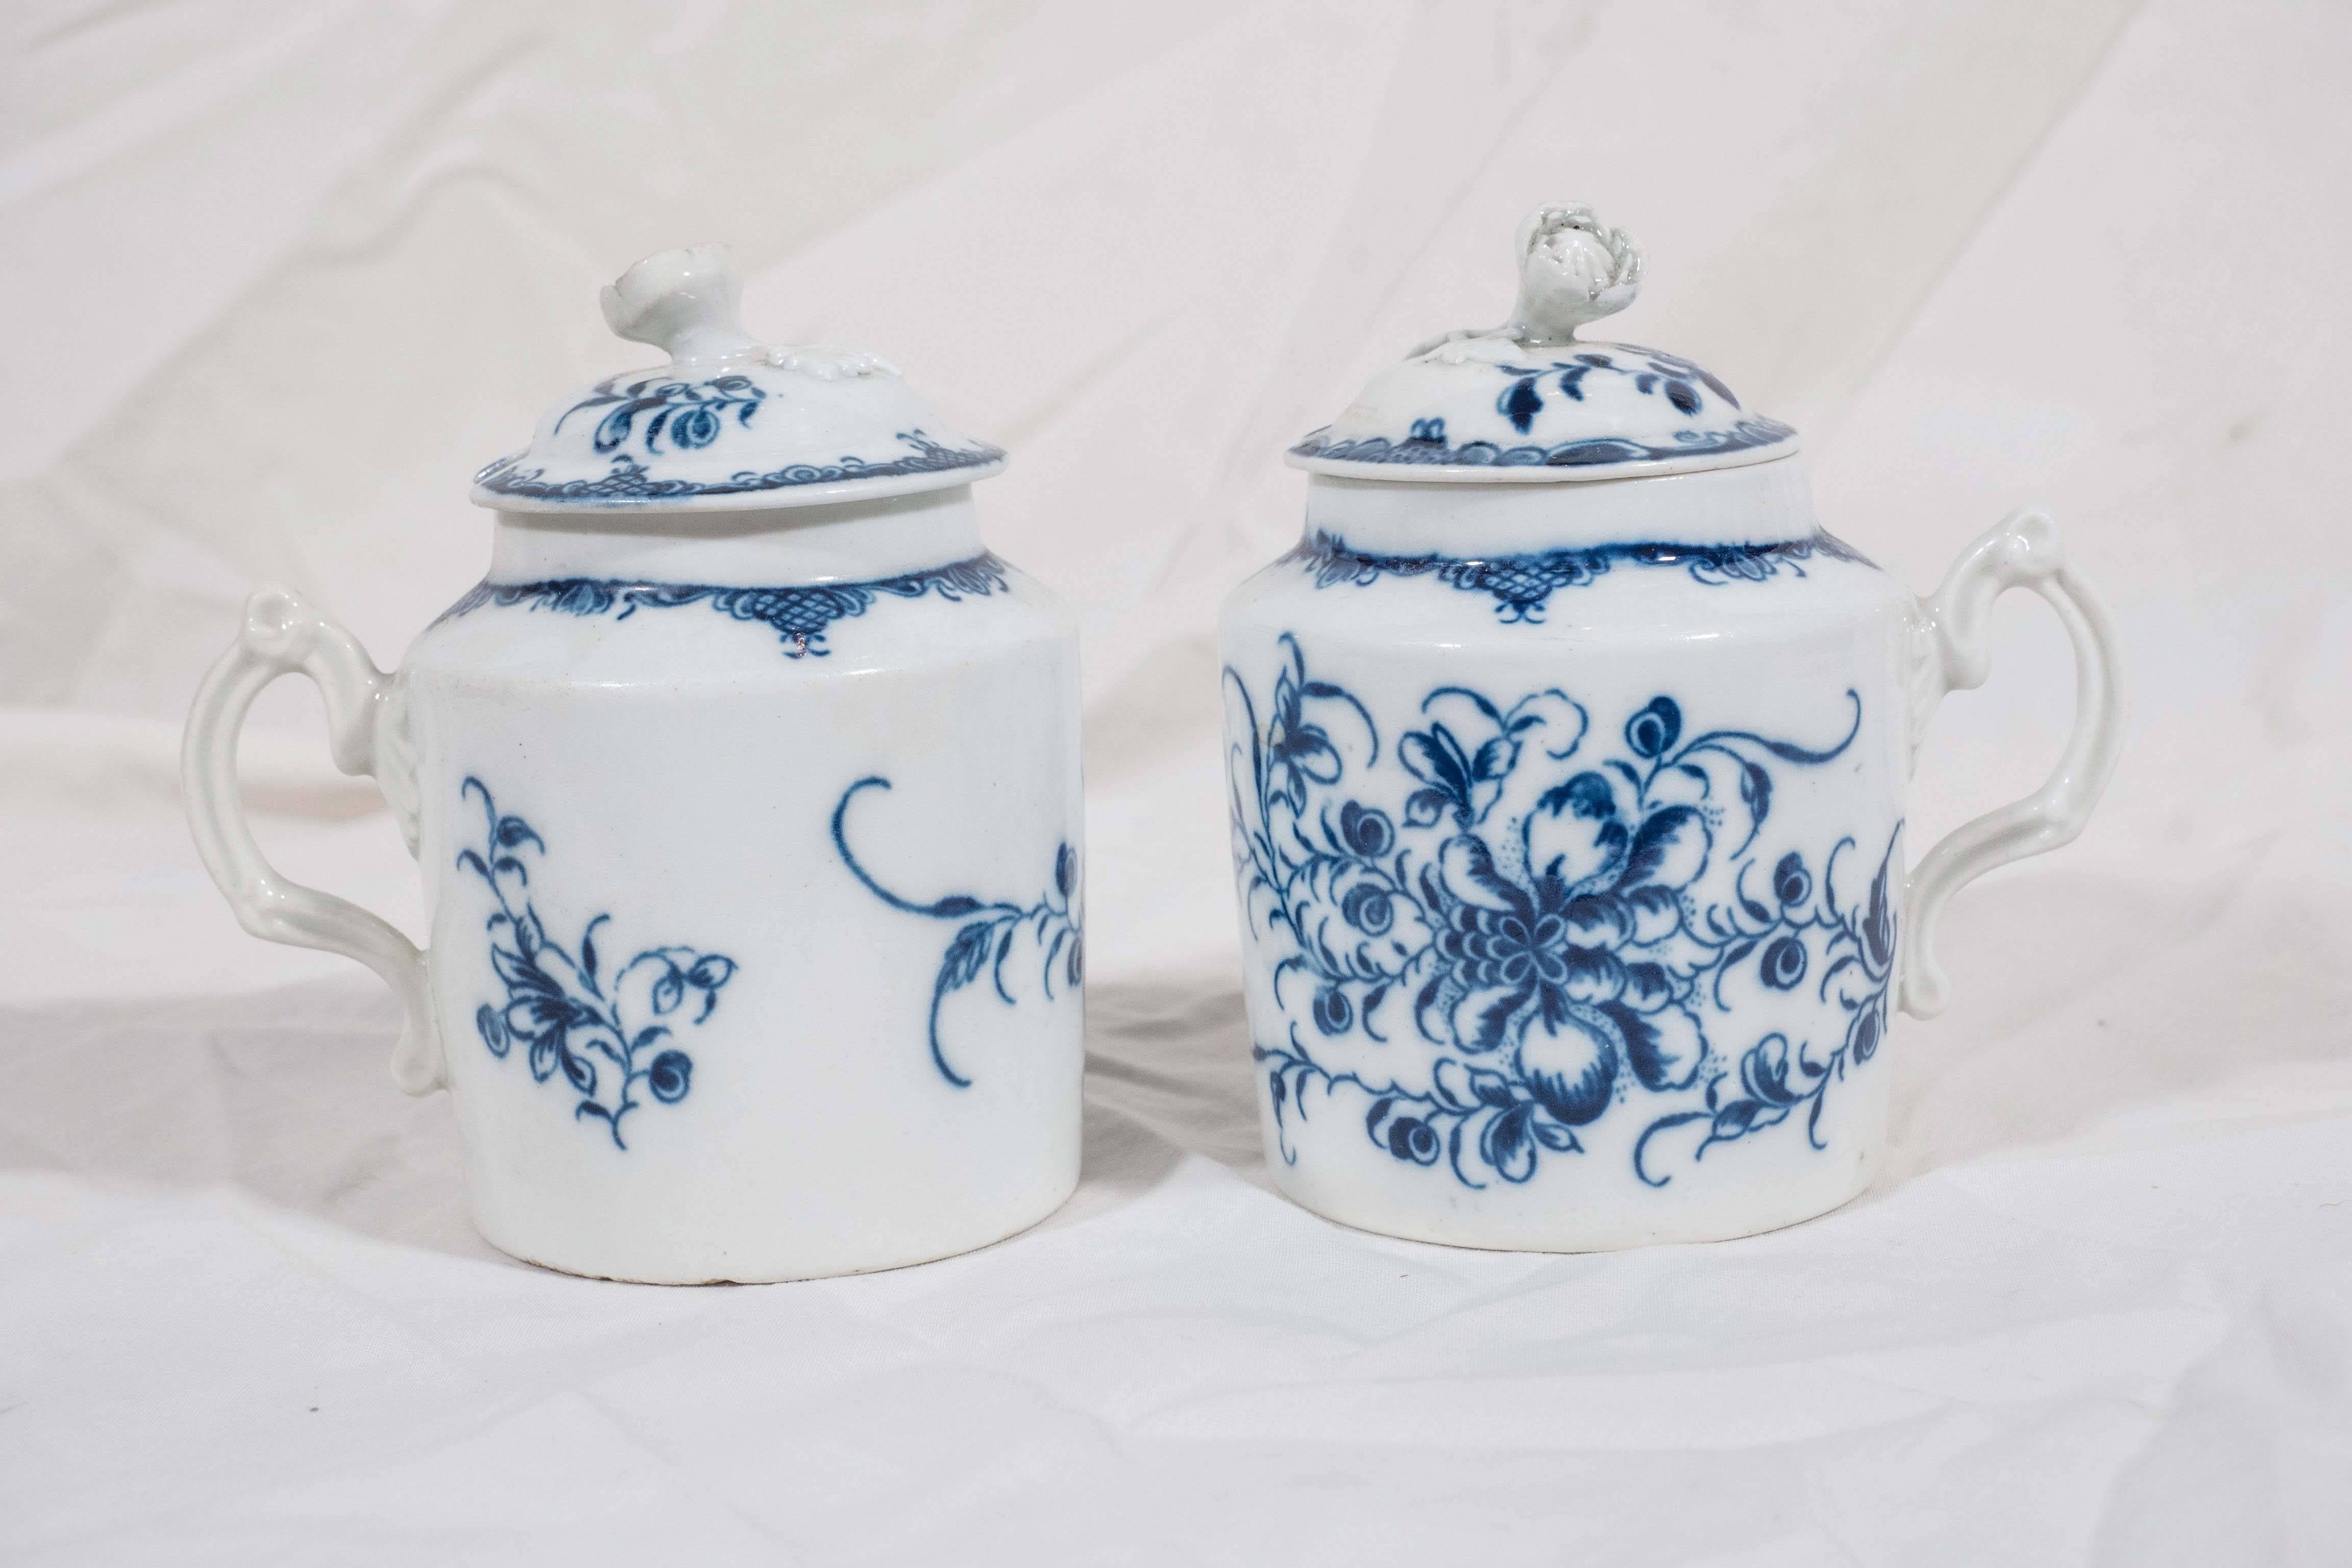 We are pleased to offer this pair of Blue and White porcelain mustard pots made in Shropshire, England by the Caughley China Works in the late 18th century. The pots are decorated in underglaze blue with a pattern of peonies and scrolling vines. The